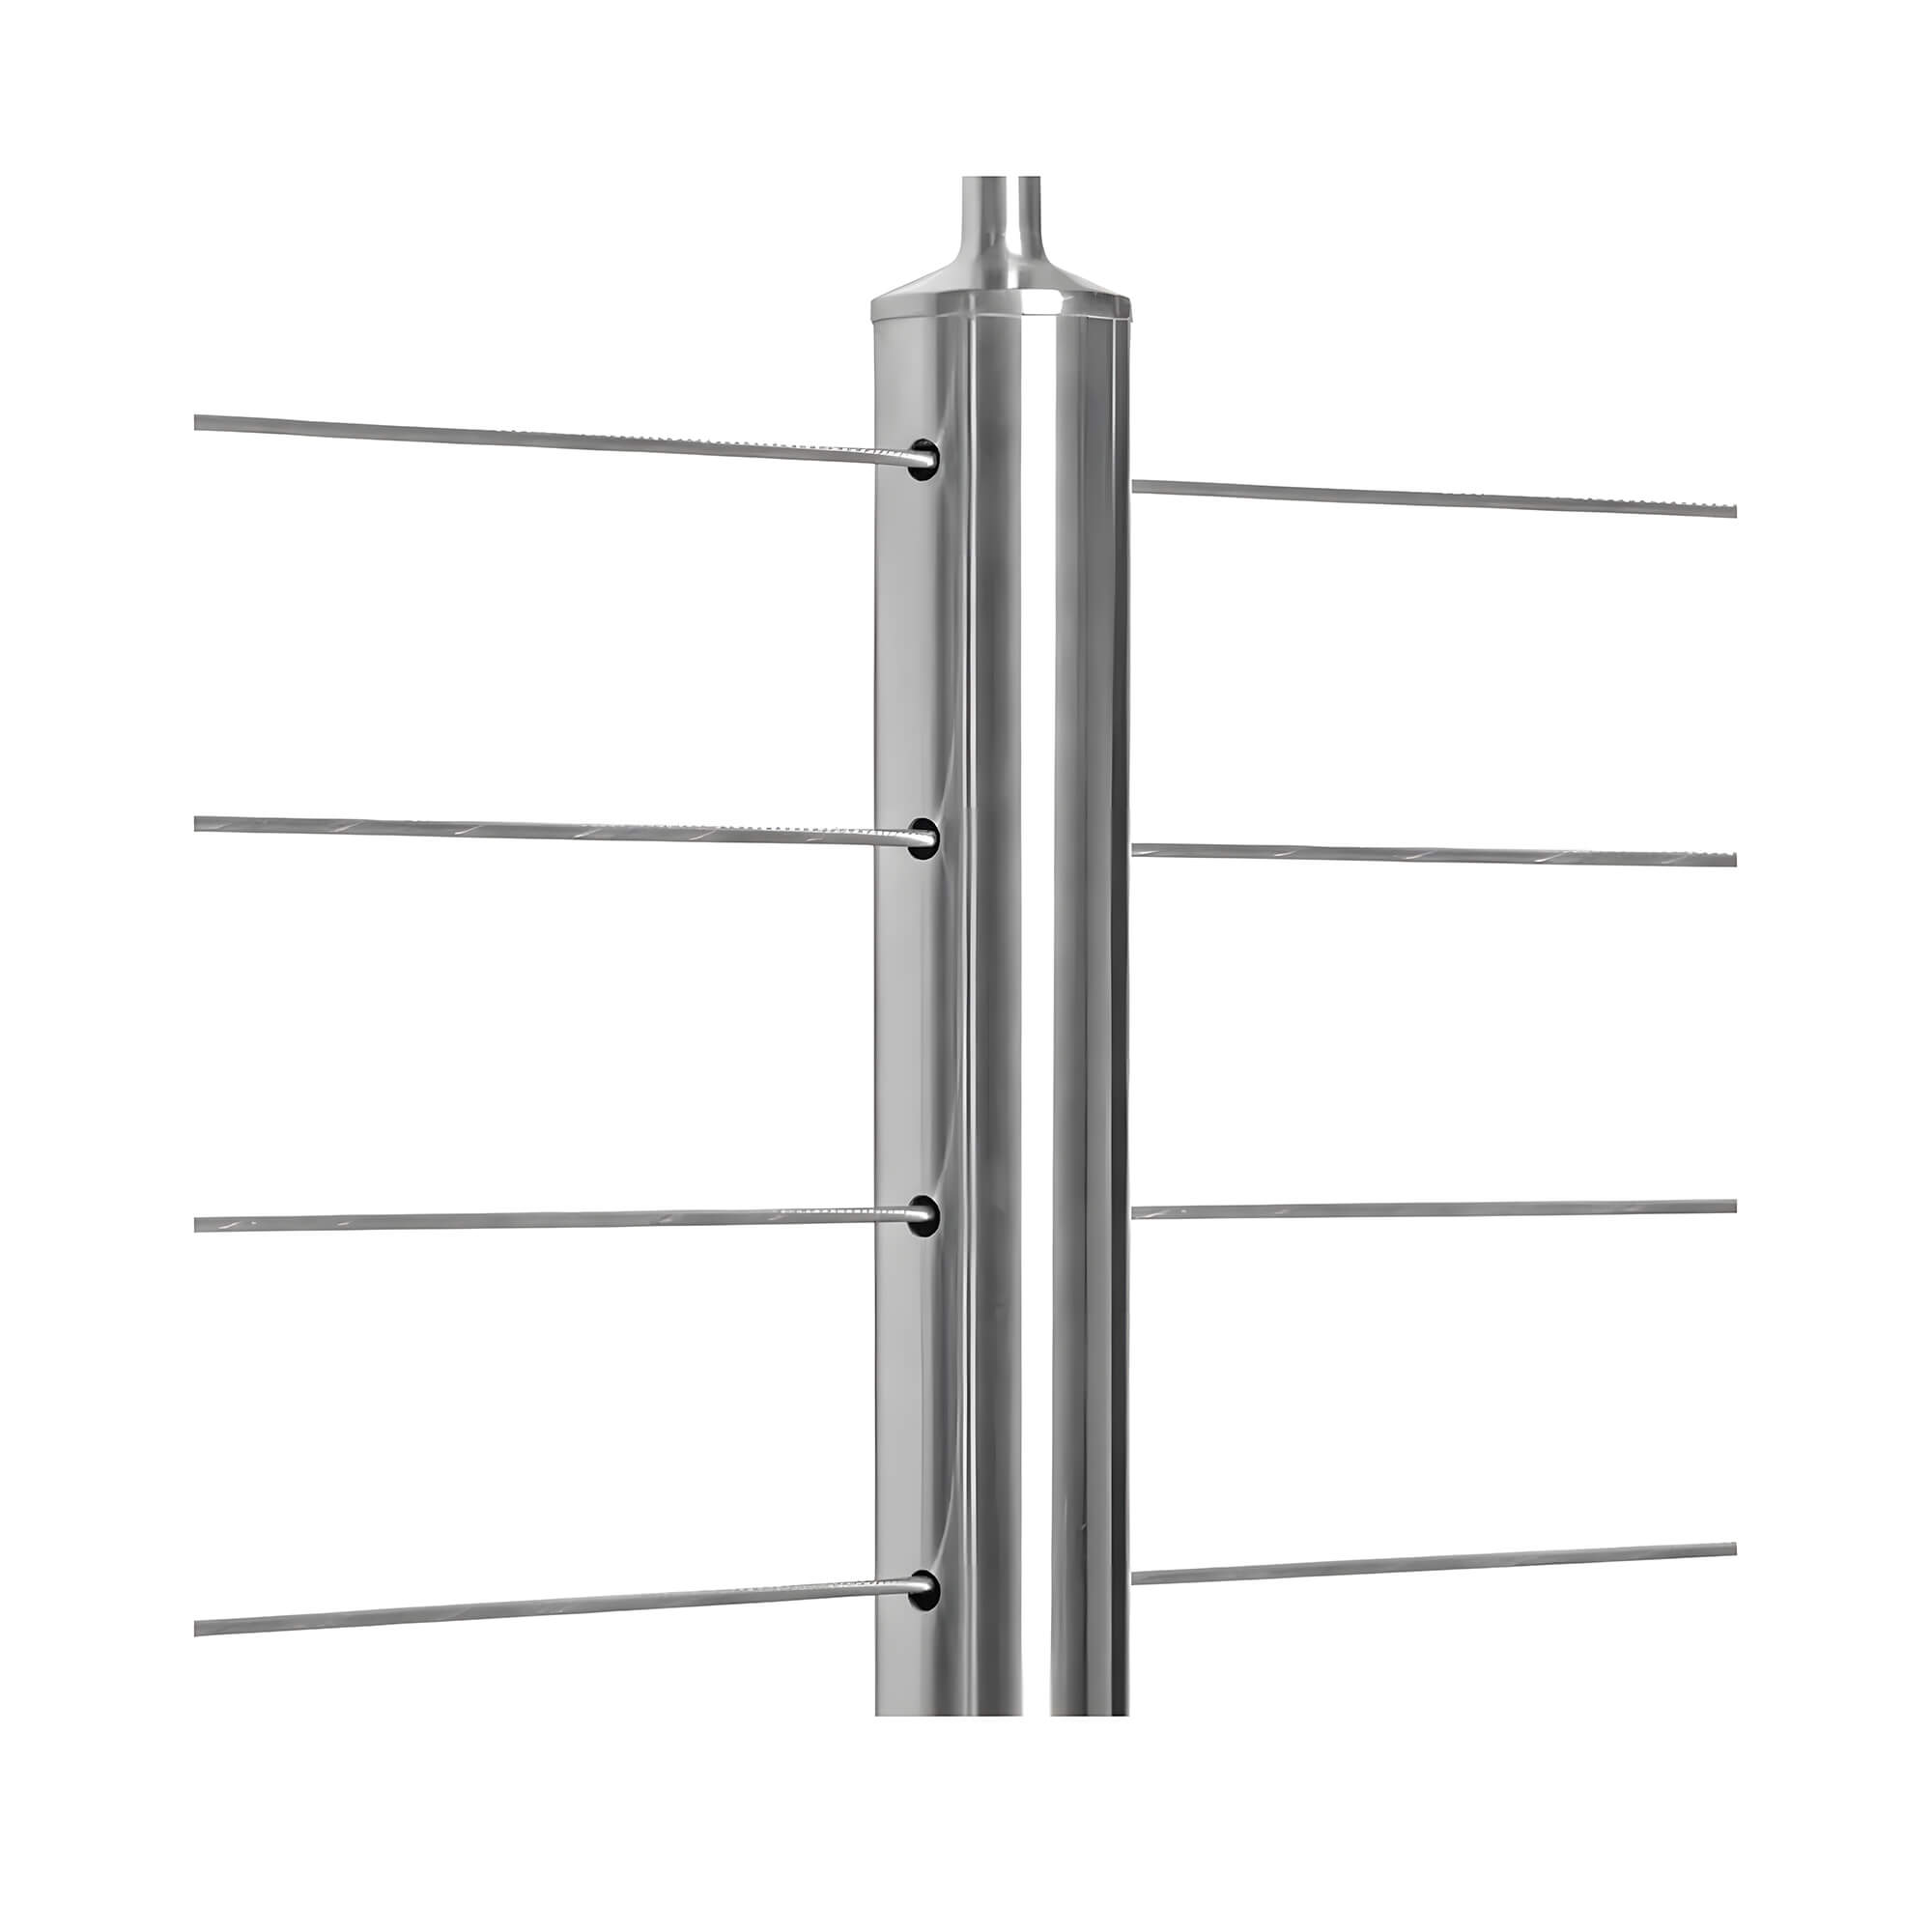 High Quality Stainless Steel Cable Railing Post For Deck Balcony Stair Balustrade Railing Interior And Exterior